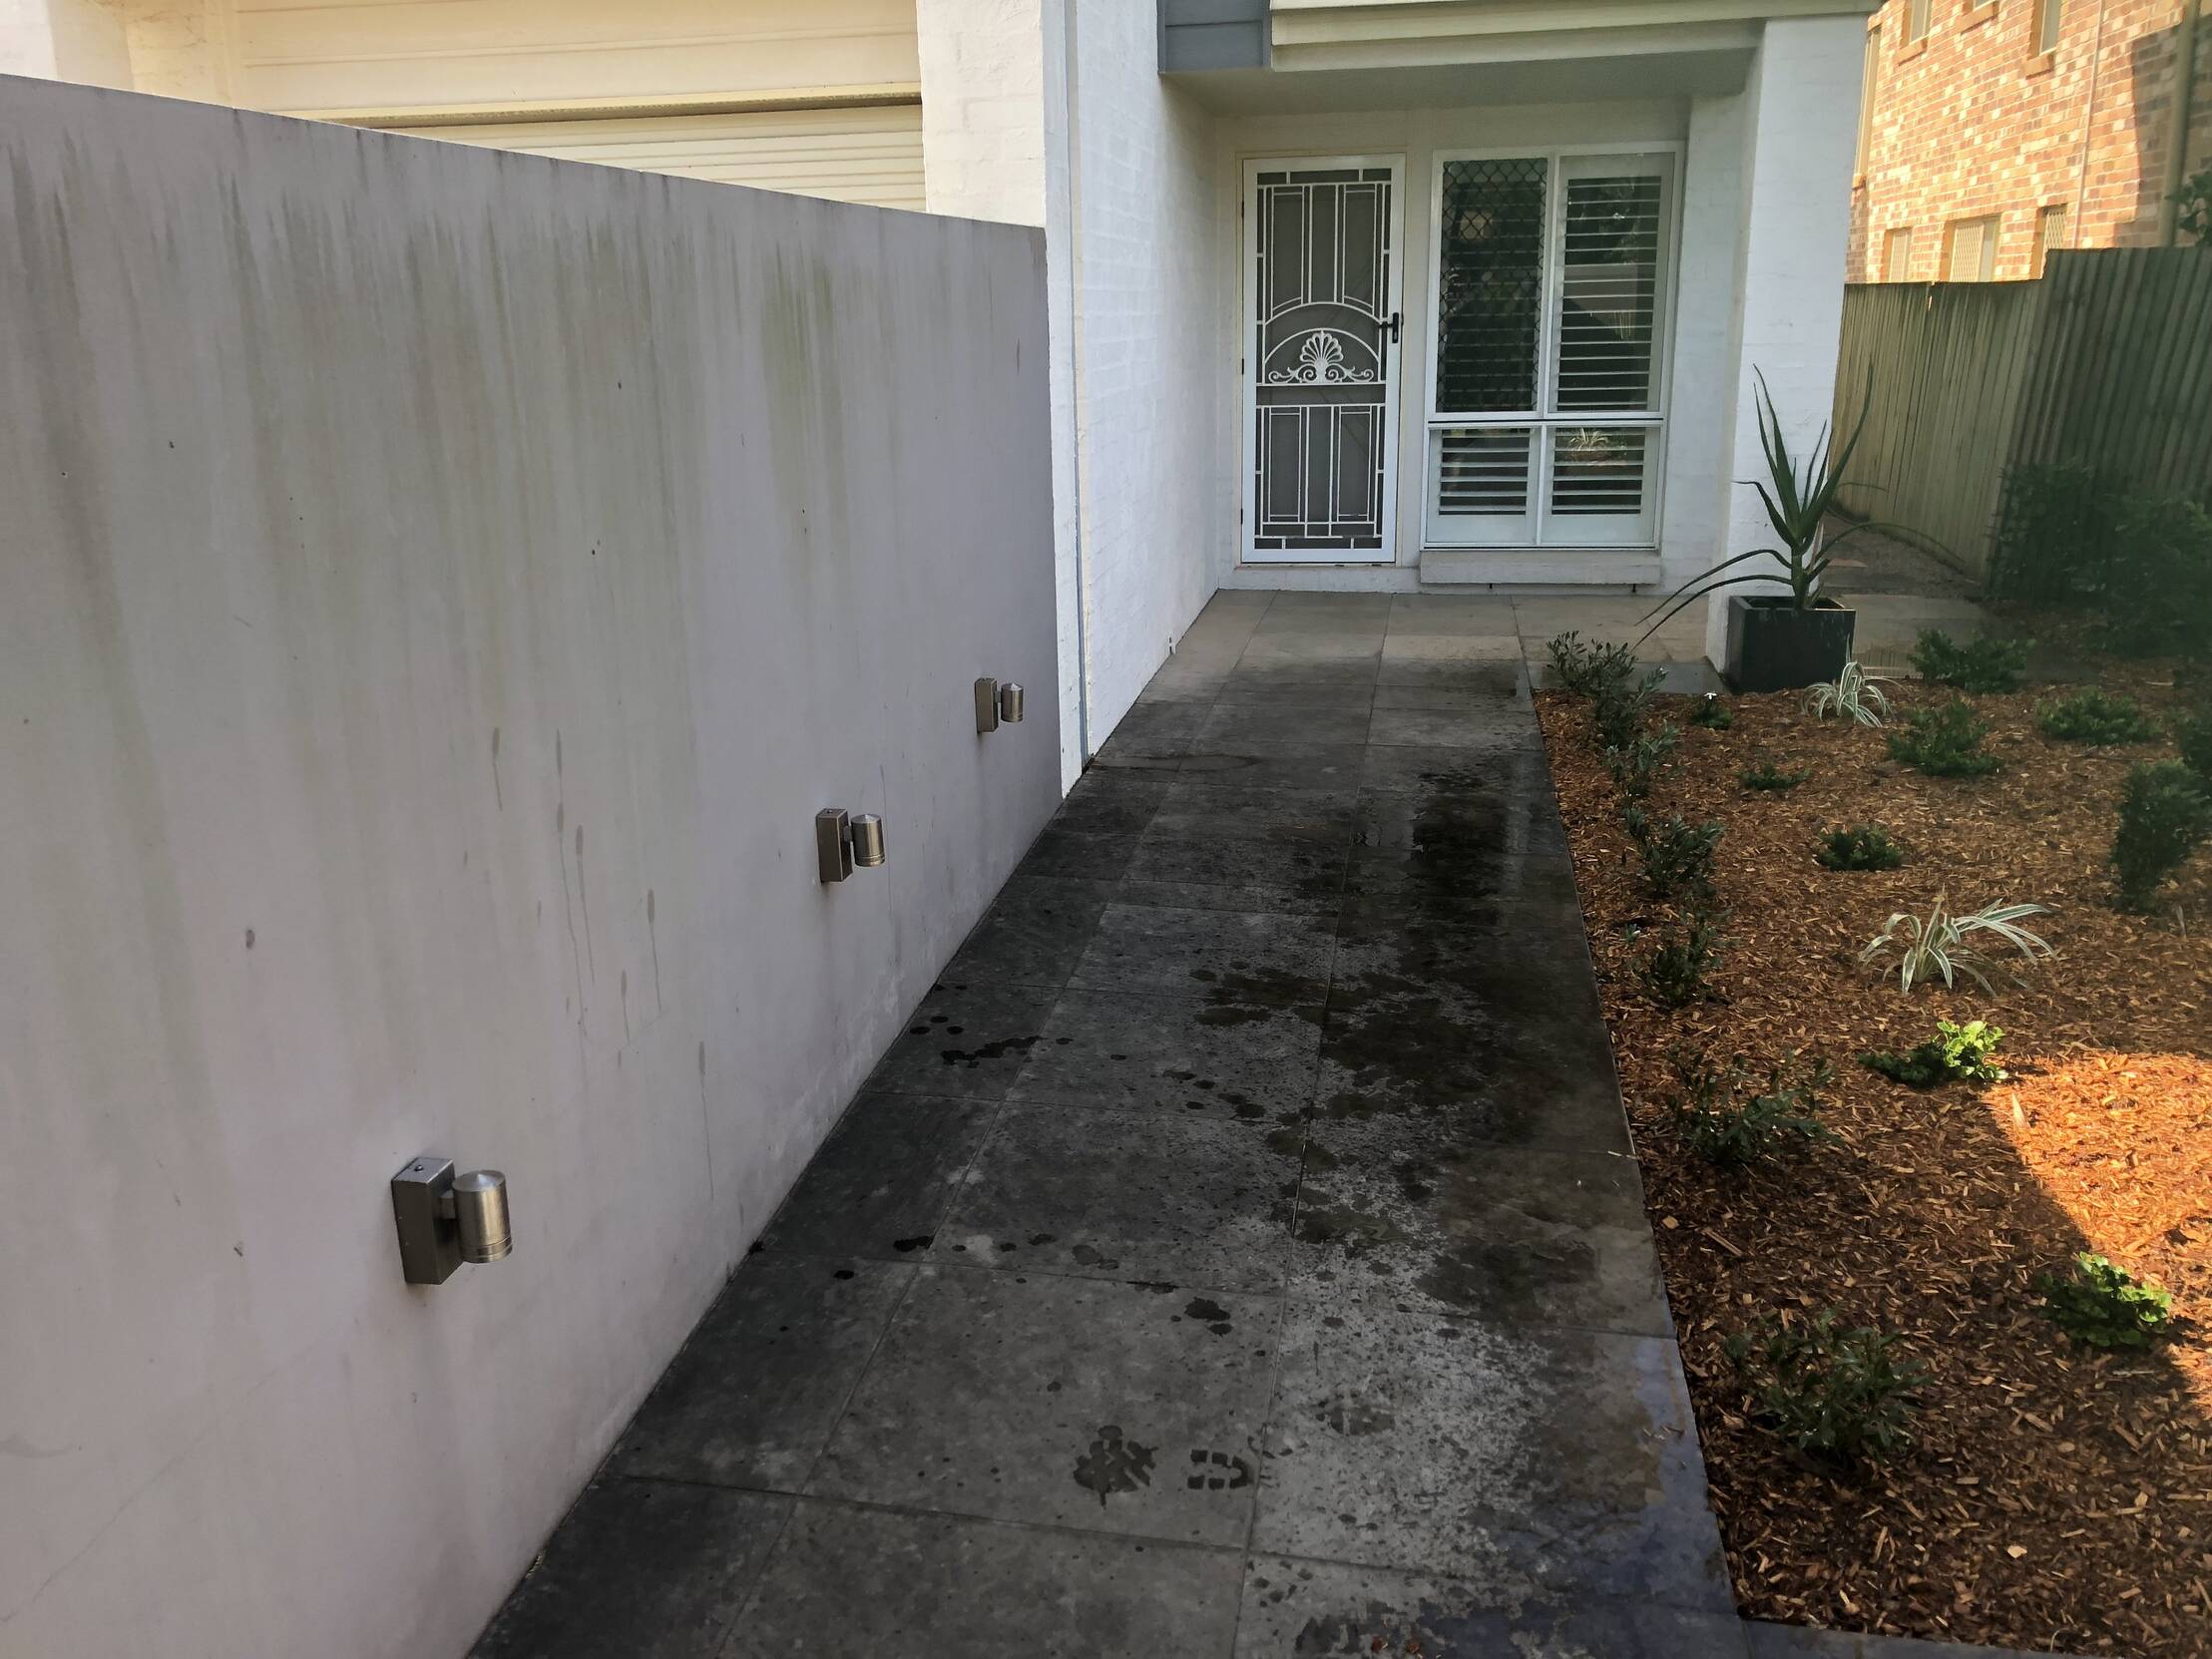 Dirty pathway leading to the front door of a property